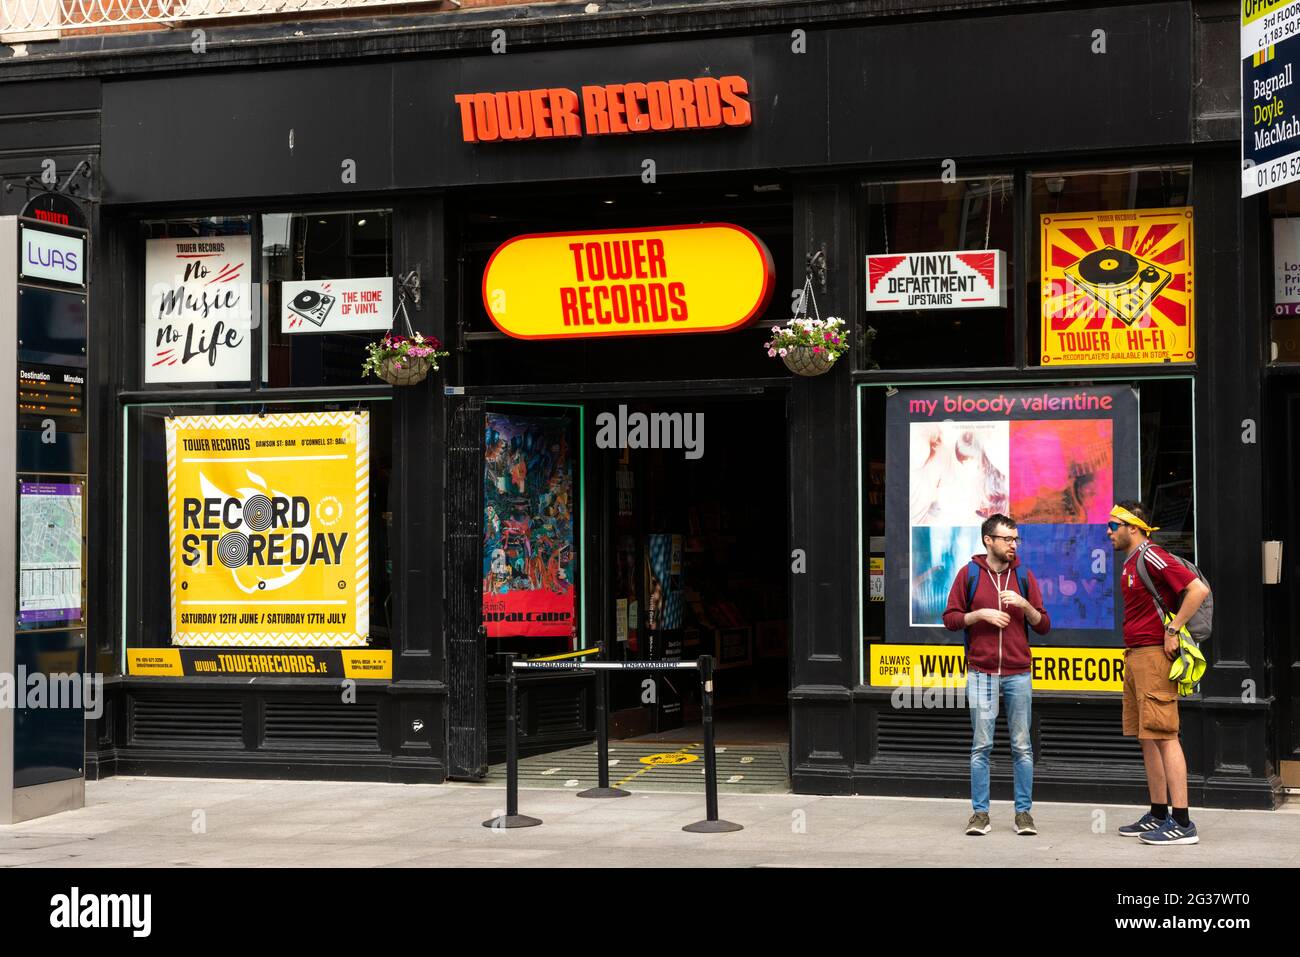 Tower Records music shop storefront at 7 Dawson Street, Dublin, Ireland as of June 2021 Stock Photo